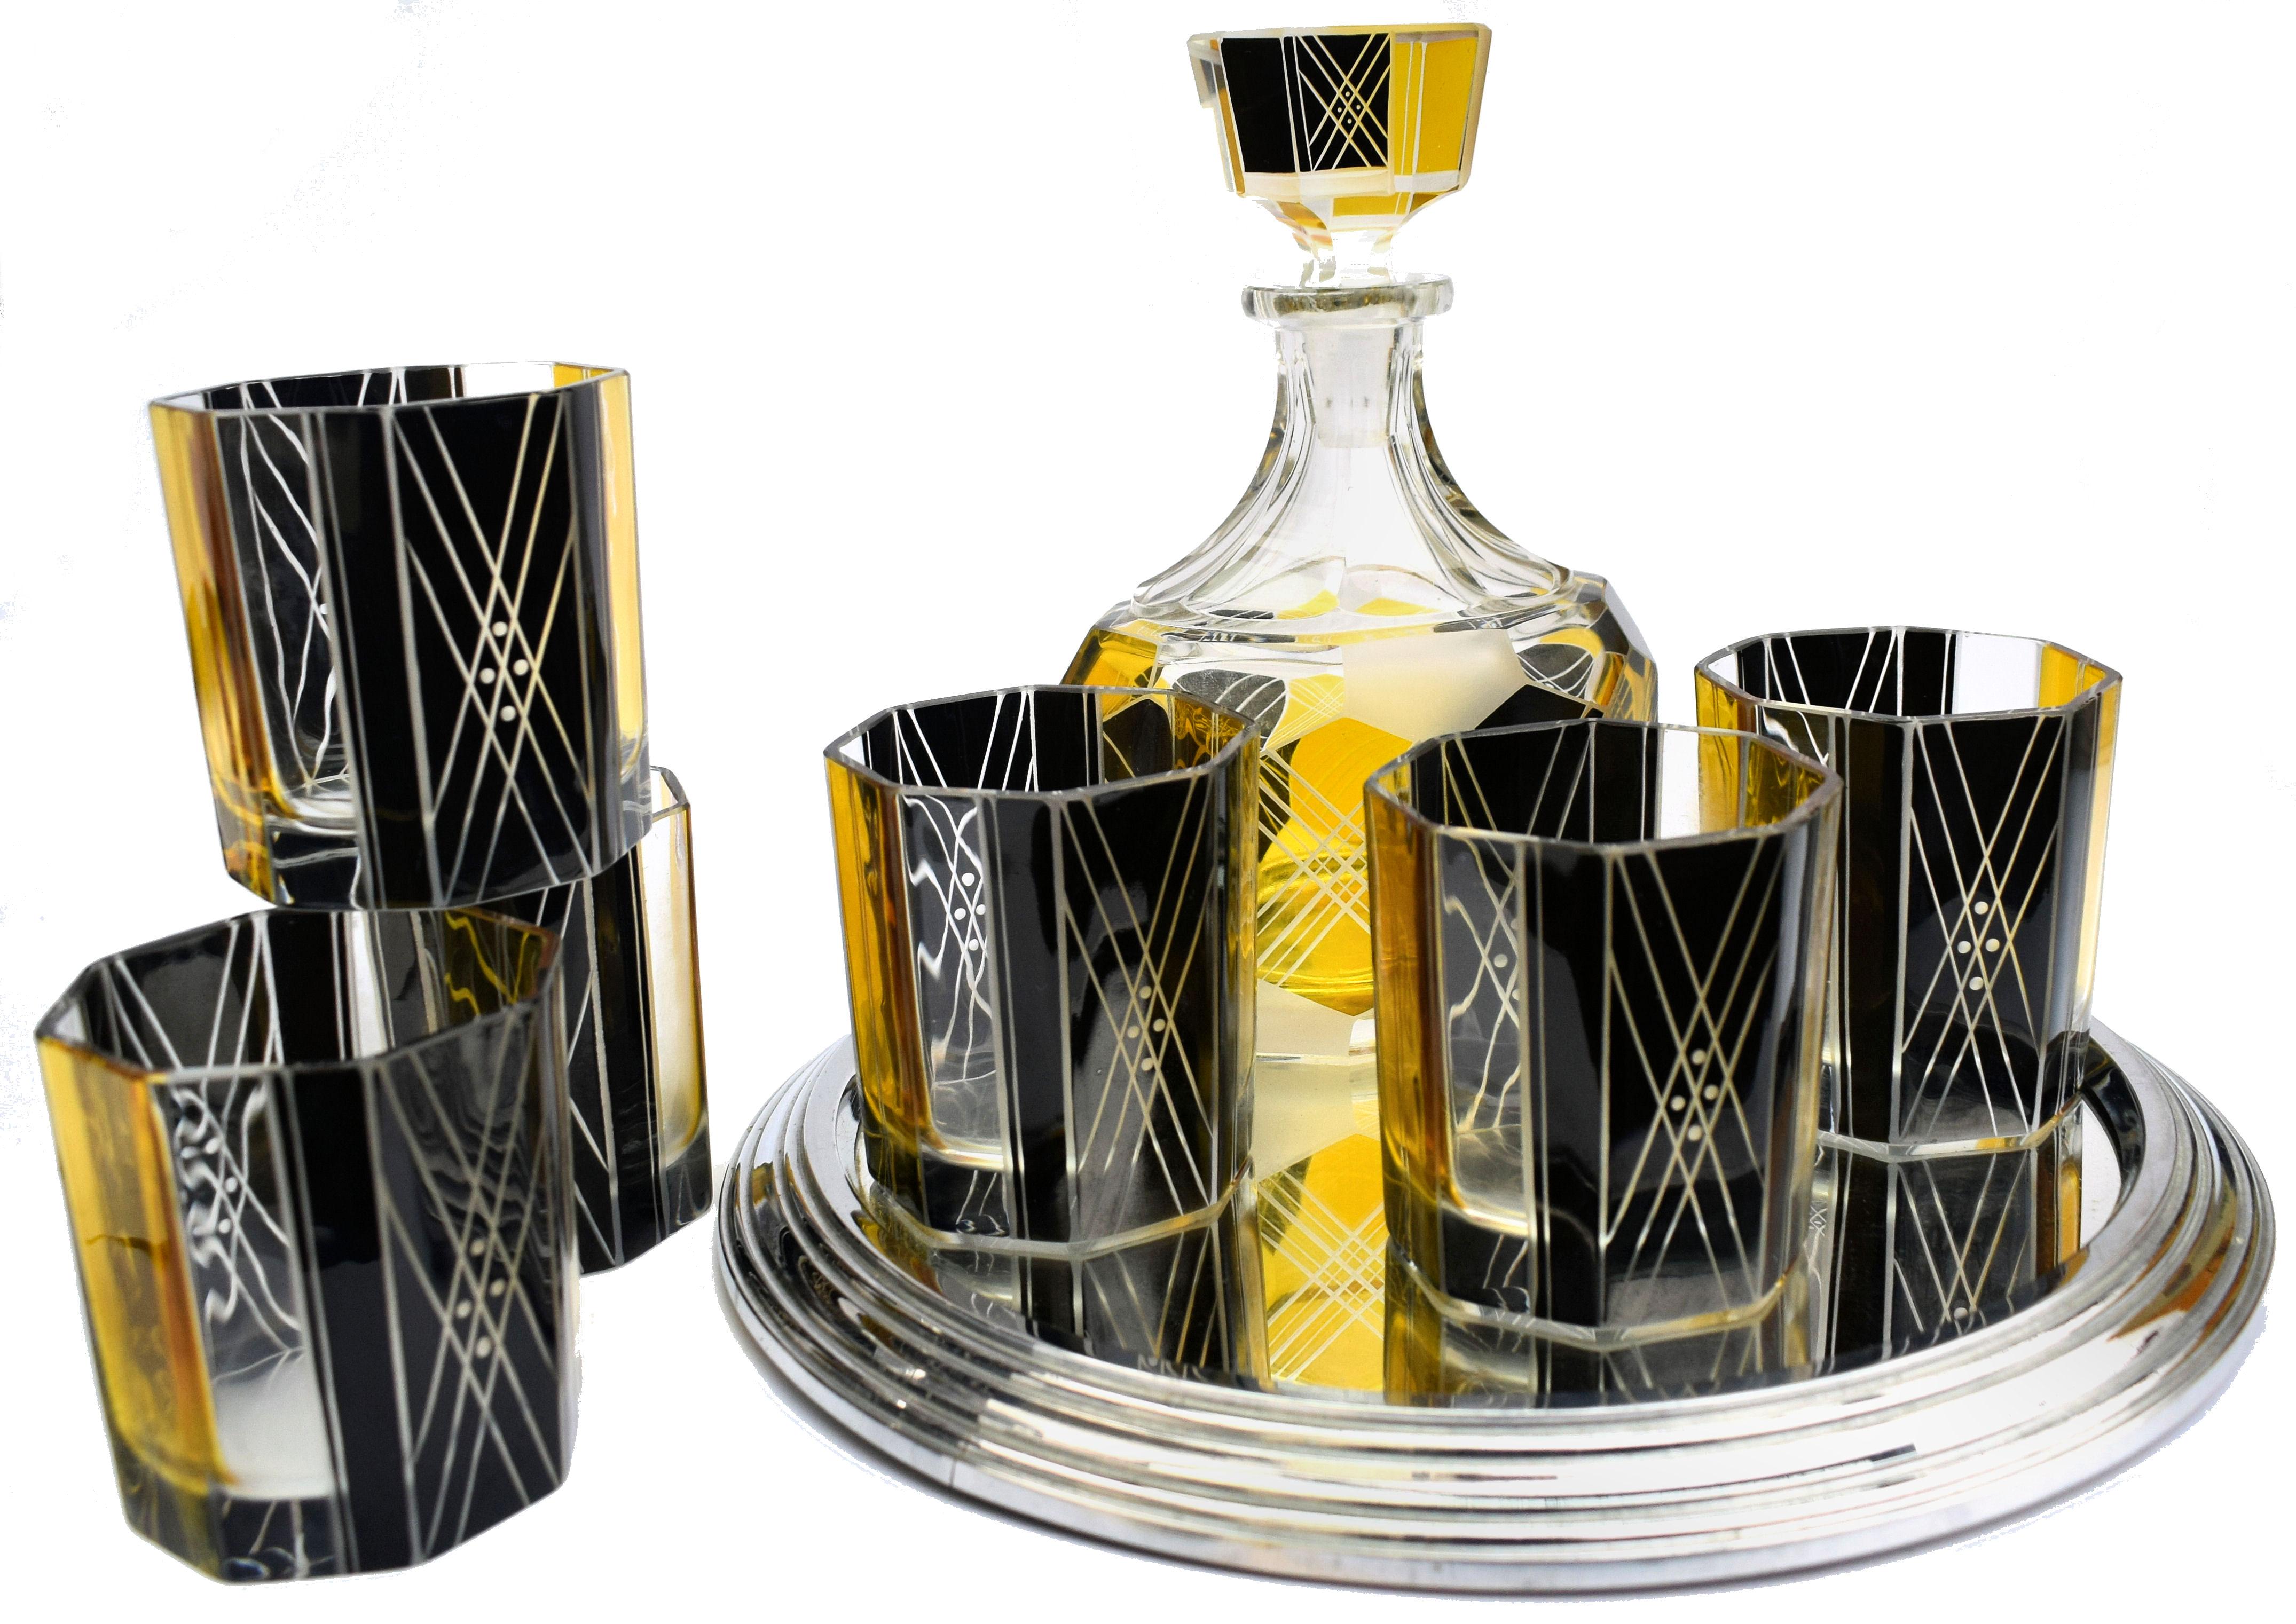 Very high quality, very striking looking 1930s Art Deco Czech glass decanter set. Features a Classic shape crystal decanter with stopper and six decent sized glass tumblers. The whole set is enameled in yellow and black with etching to highlight the